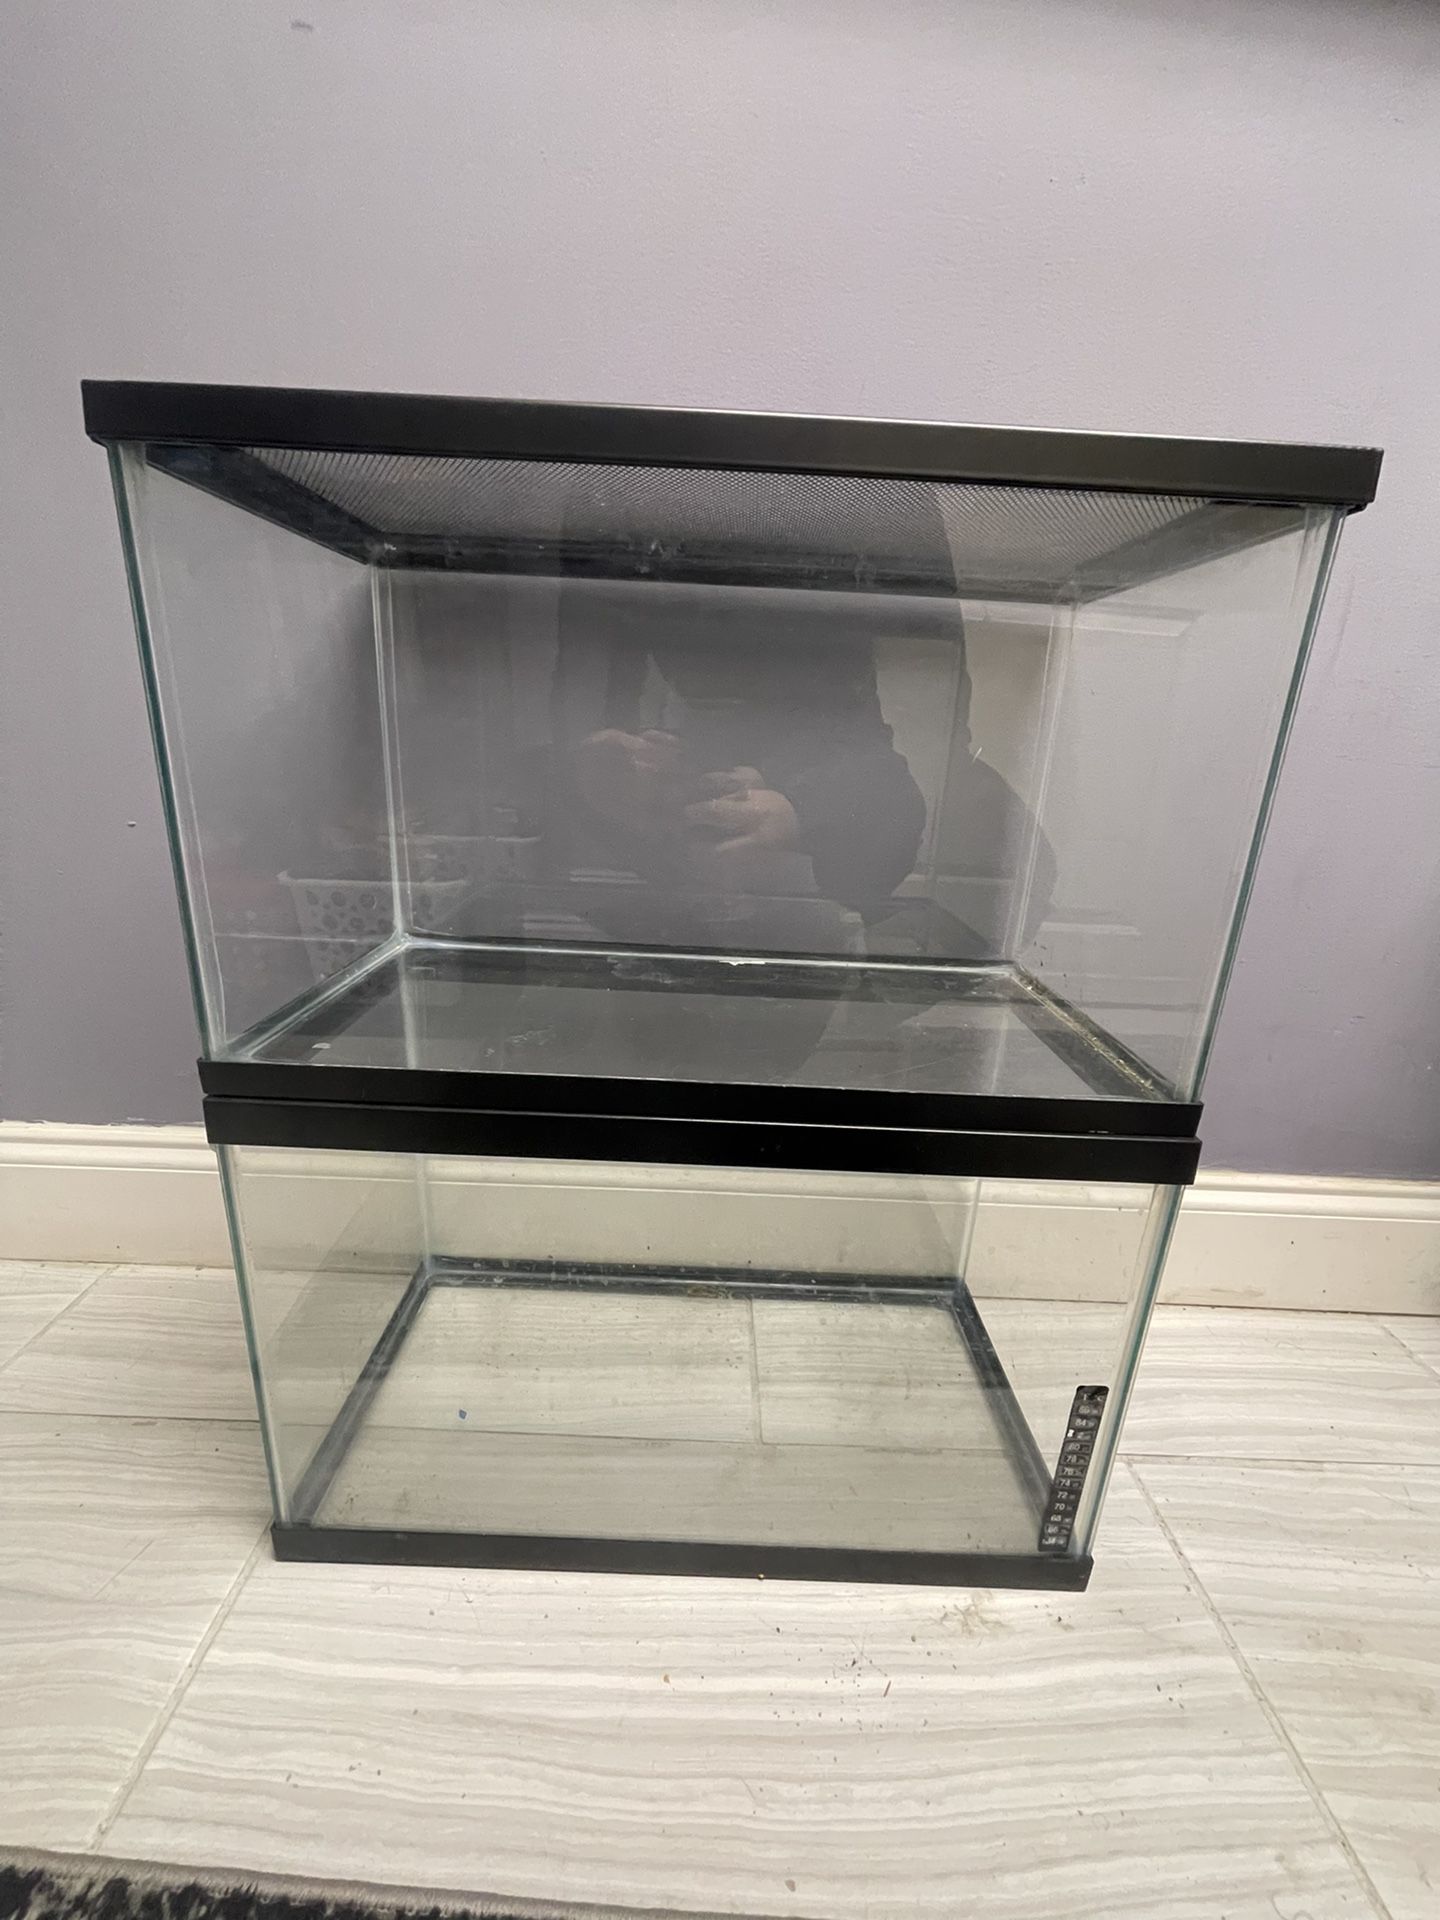 10 Gallon Tanks (two) Best Offer